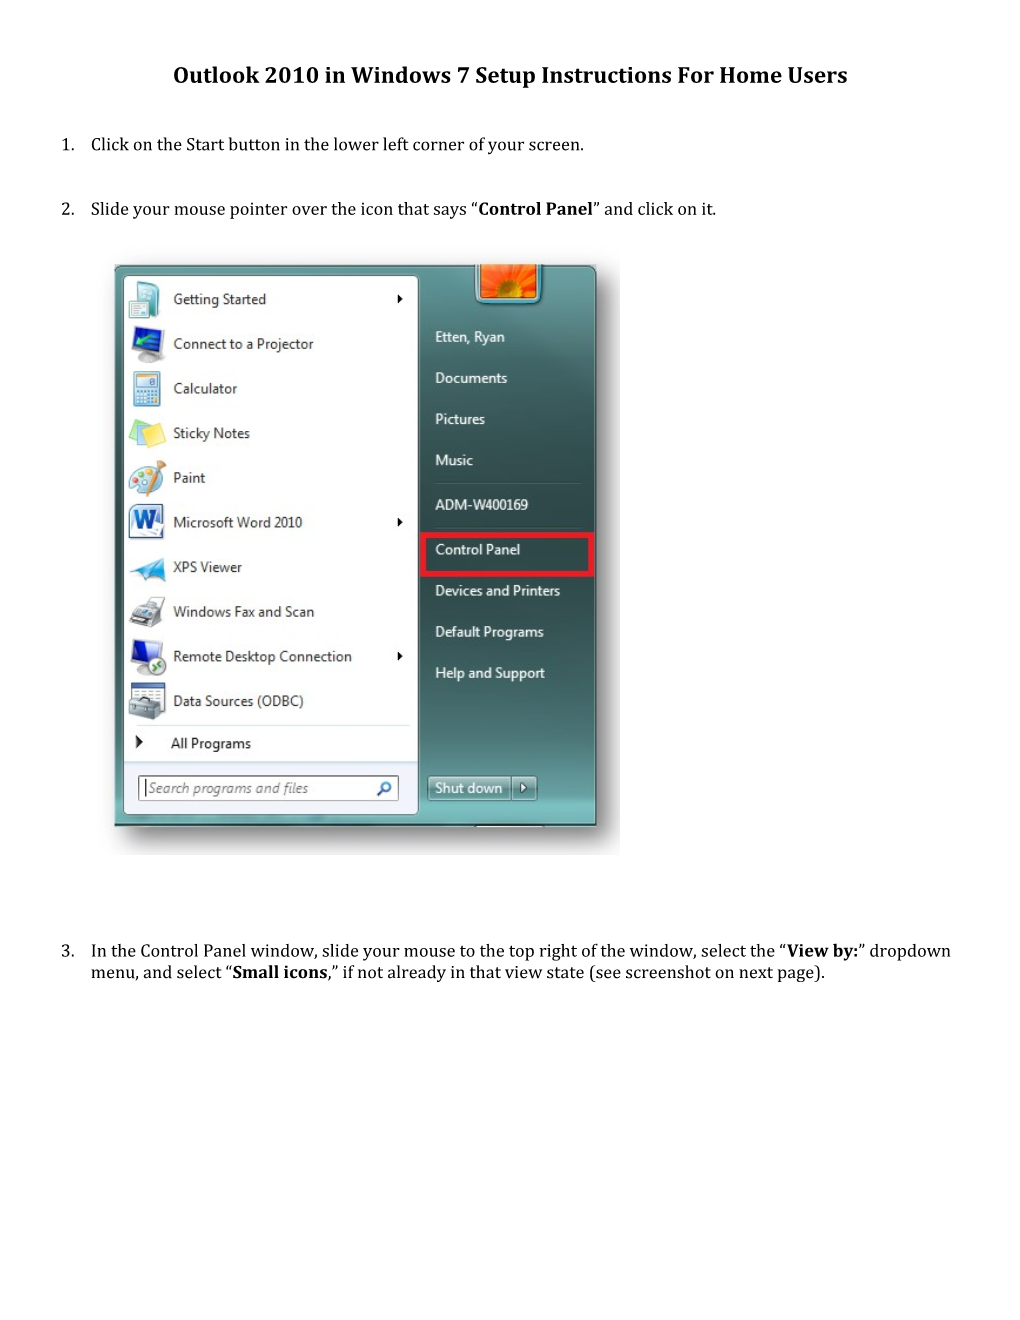 Outlook 2010 in Windows 7 Setup Instructions for Home Users